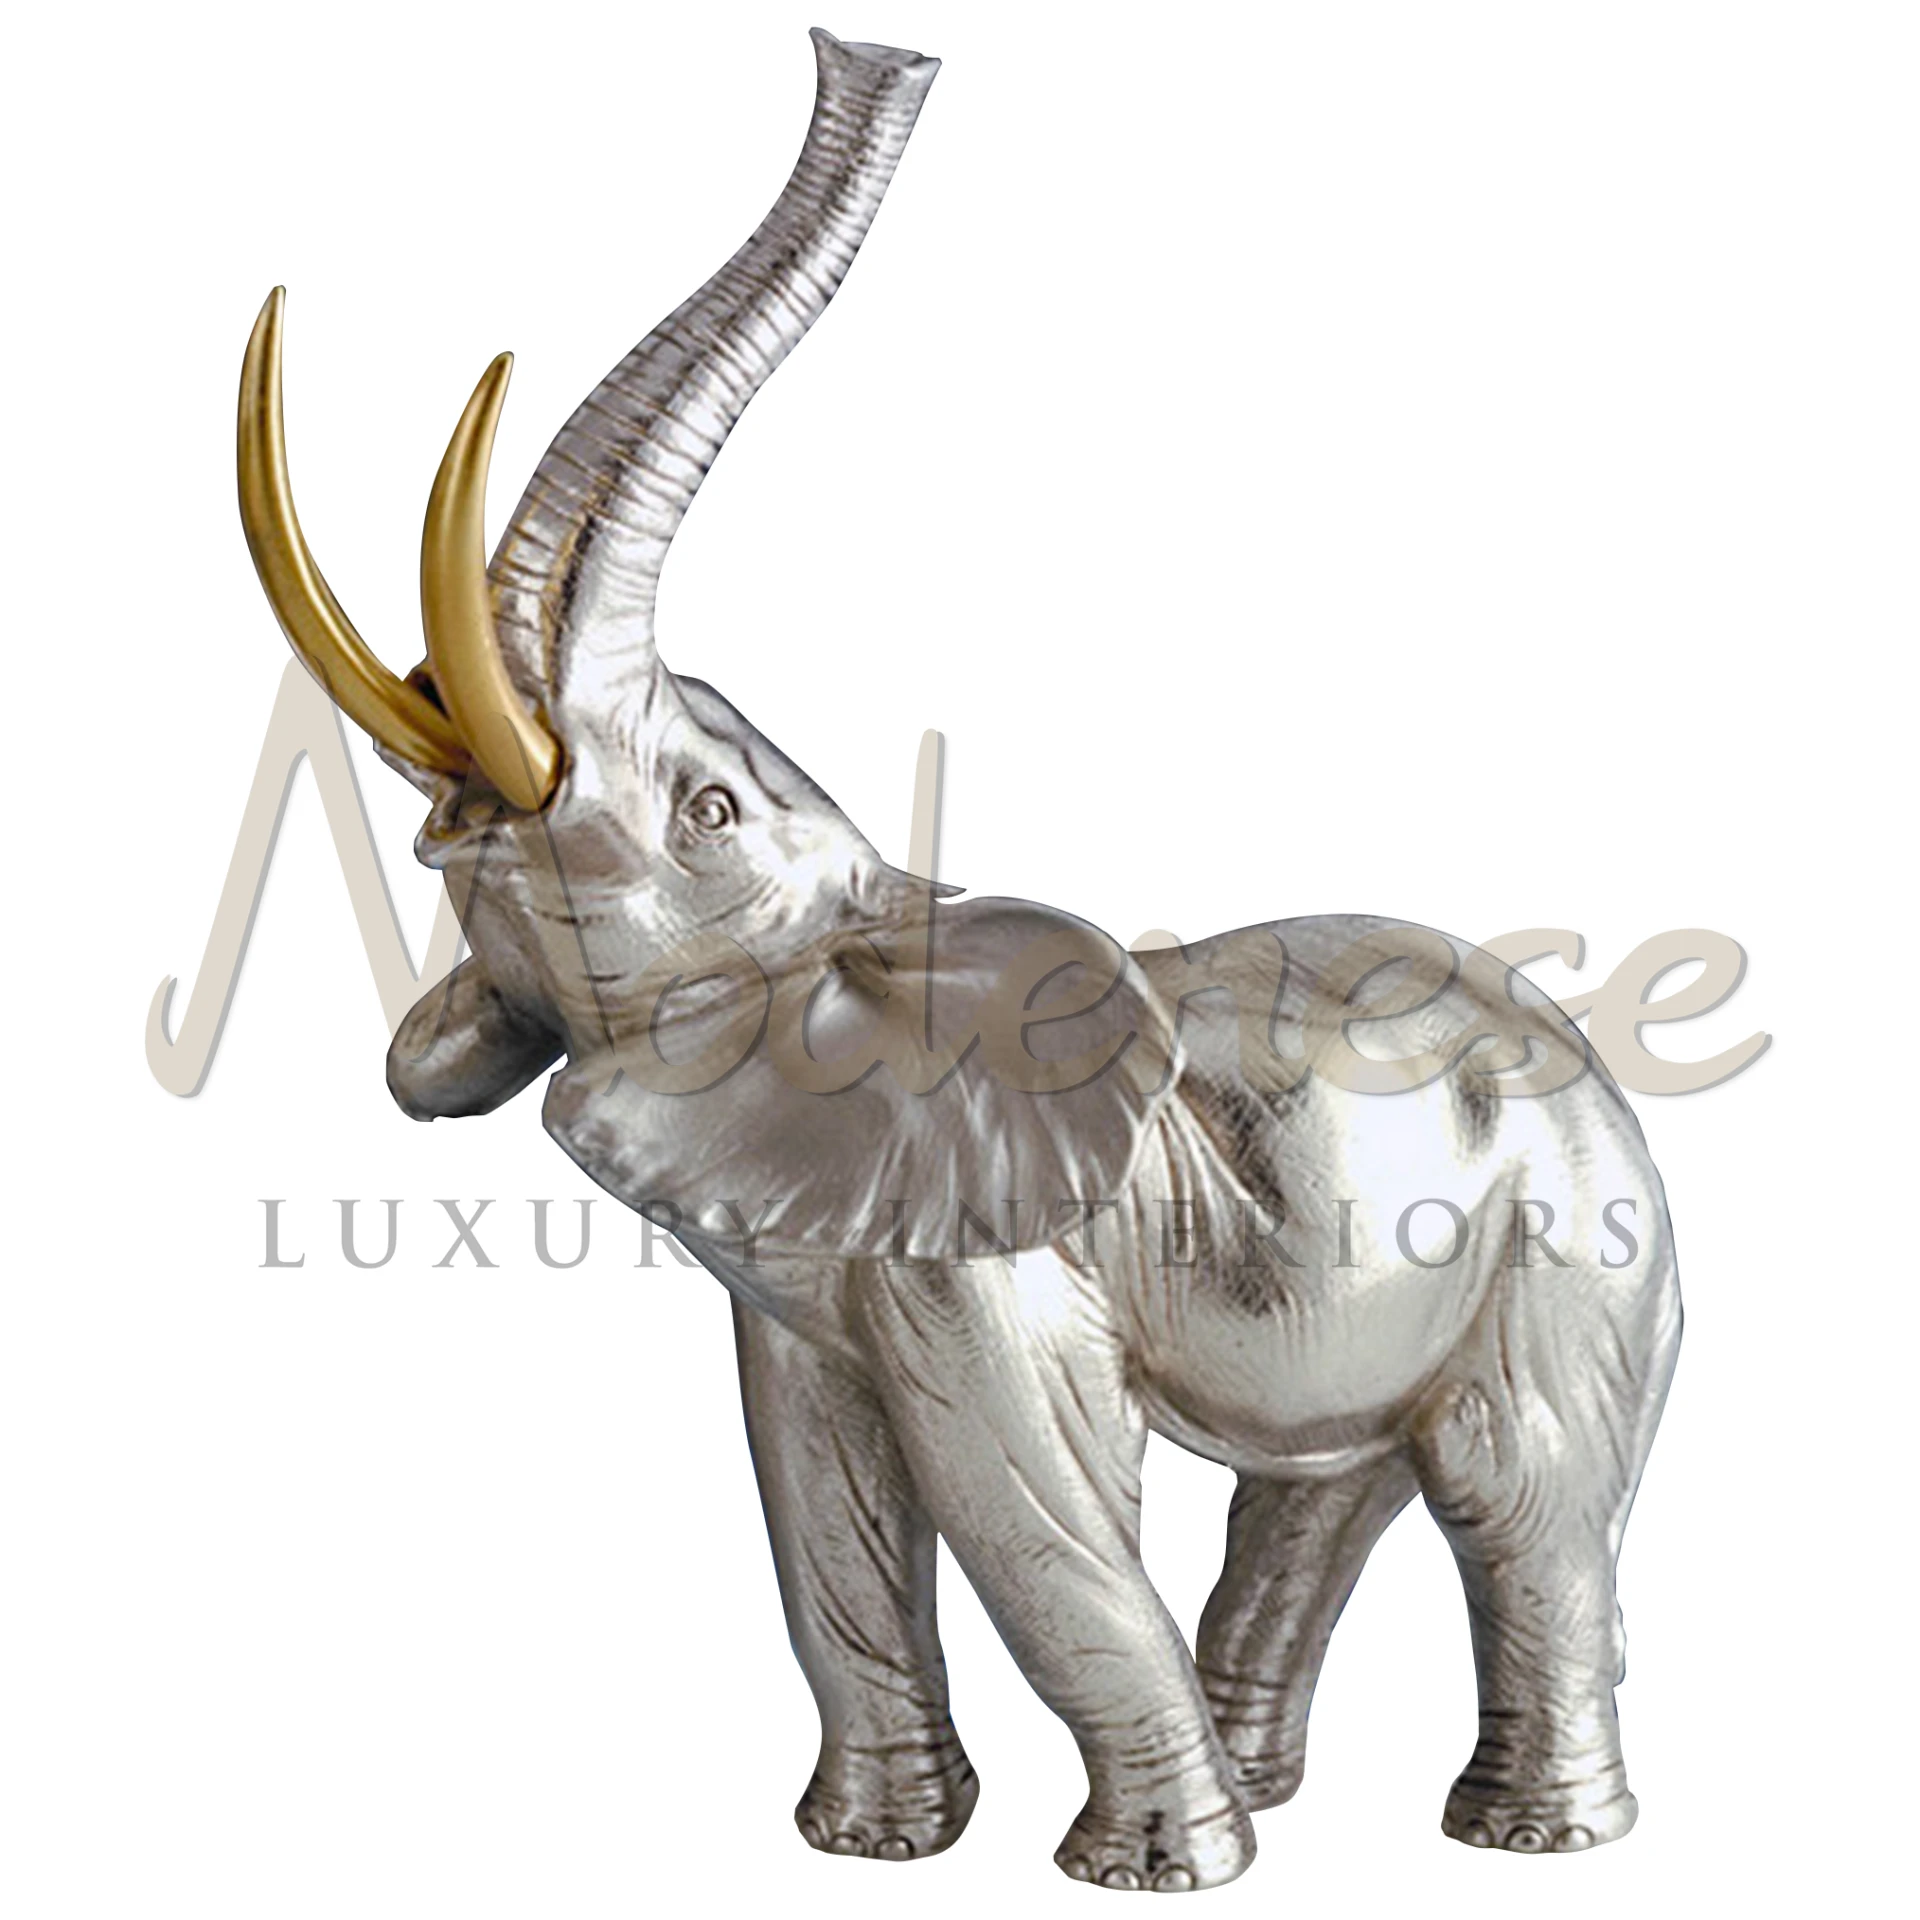 Elegant Silver Elephant statue, masterfully crafted in high-quality materials, capturing the gentle giant's majestic and peaceful essence for luxury home décor.






